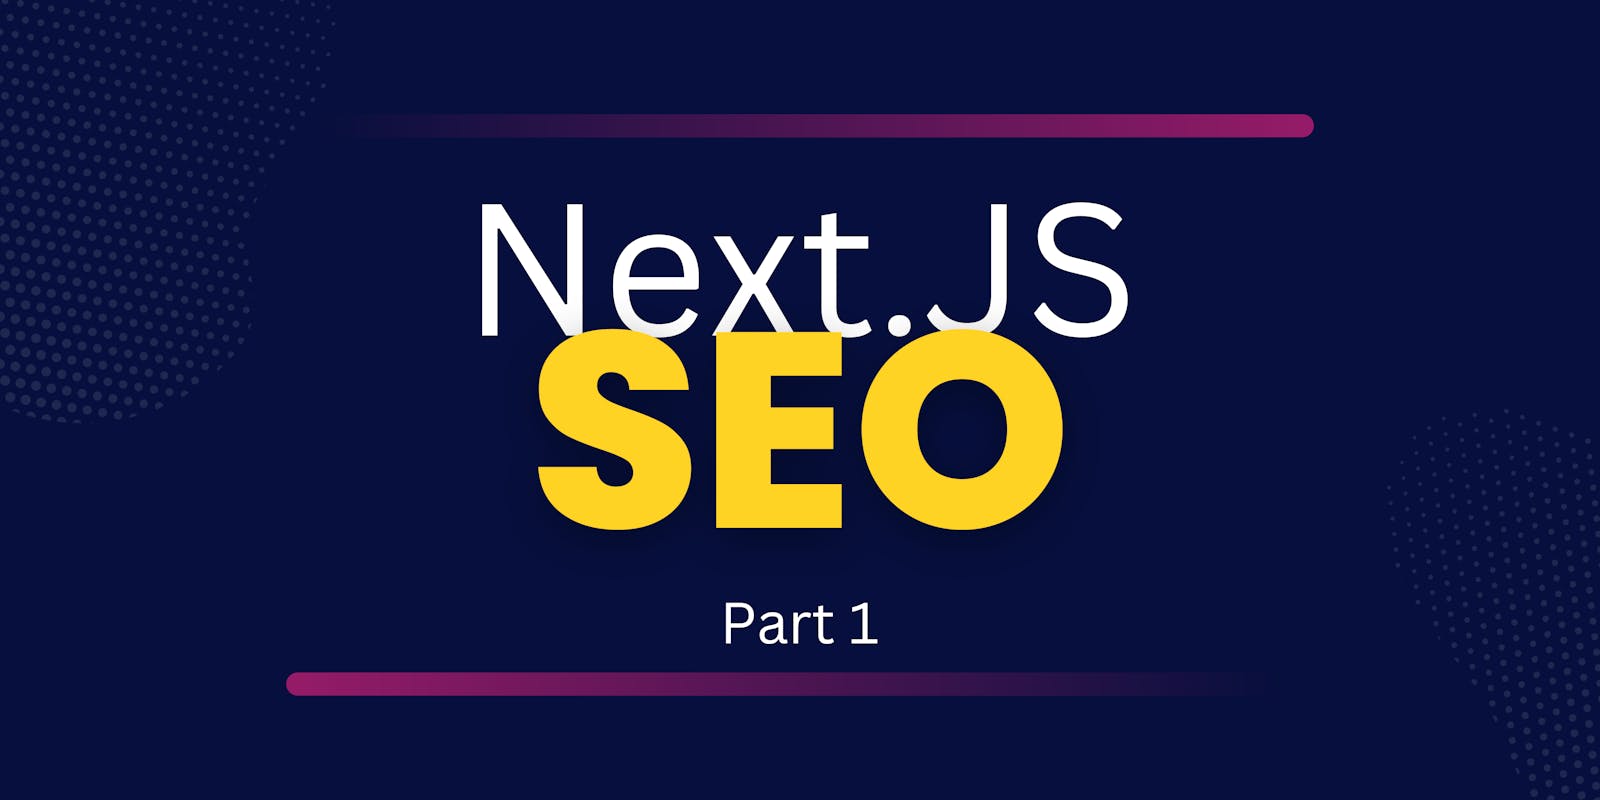 Next.js SEO Optimization for Developers and SEO Experts: Part 1 - Crawling, Indexing, and Rendering Strategies